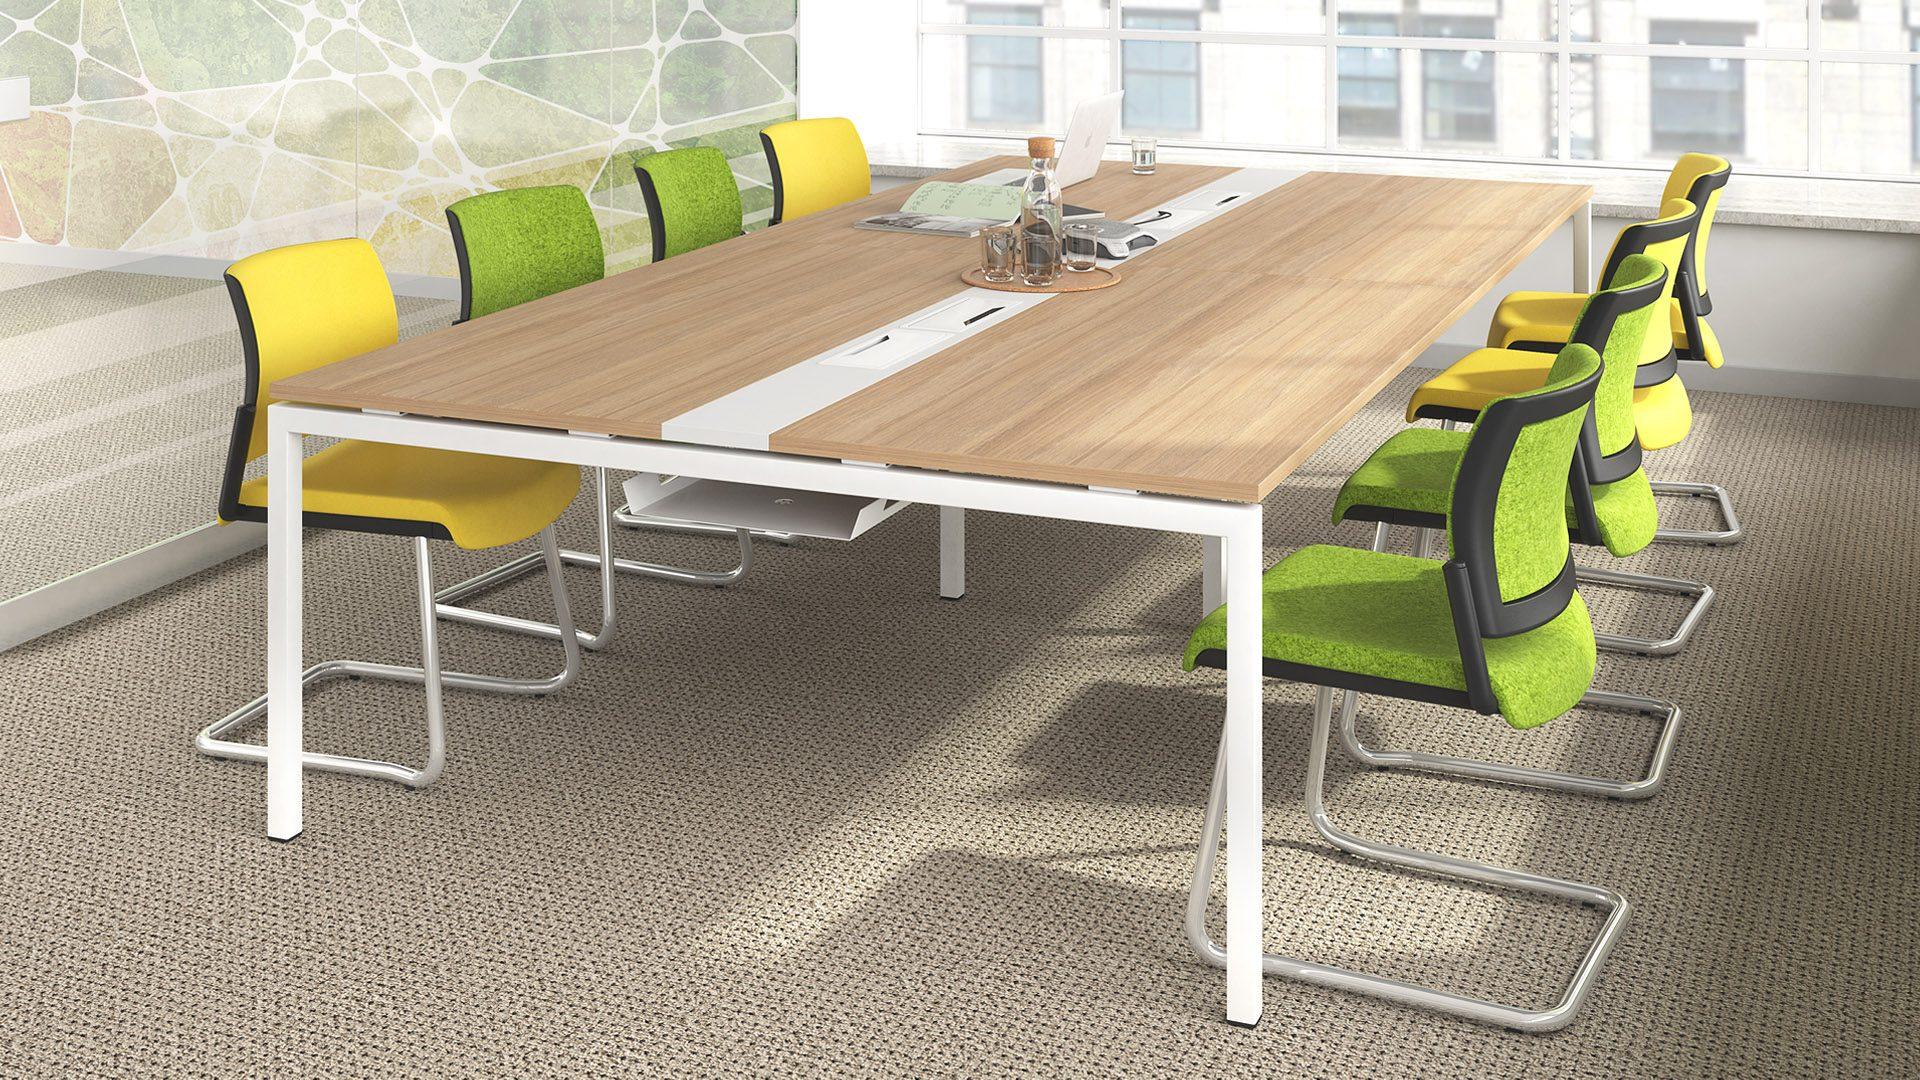 Part of the extensive Nova furniture range Nova meeting tables offer cable management inserts in the centre